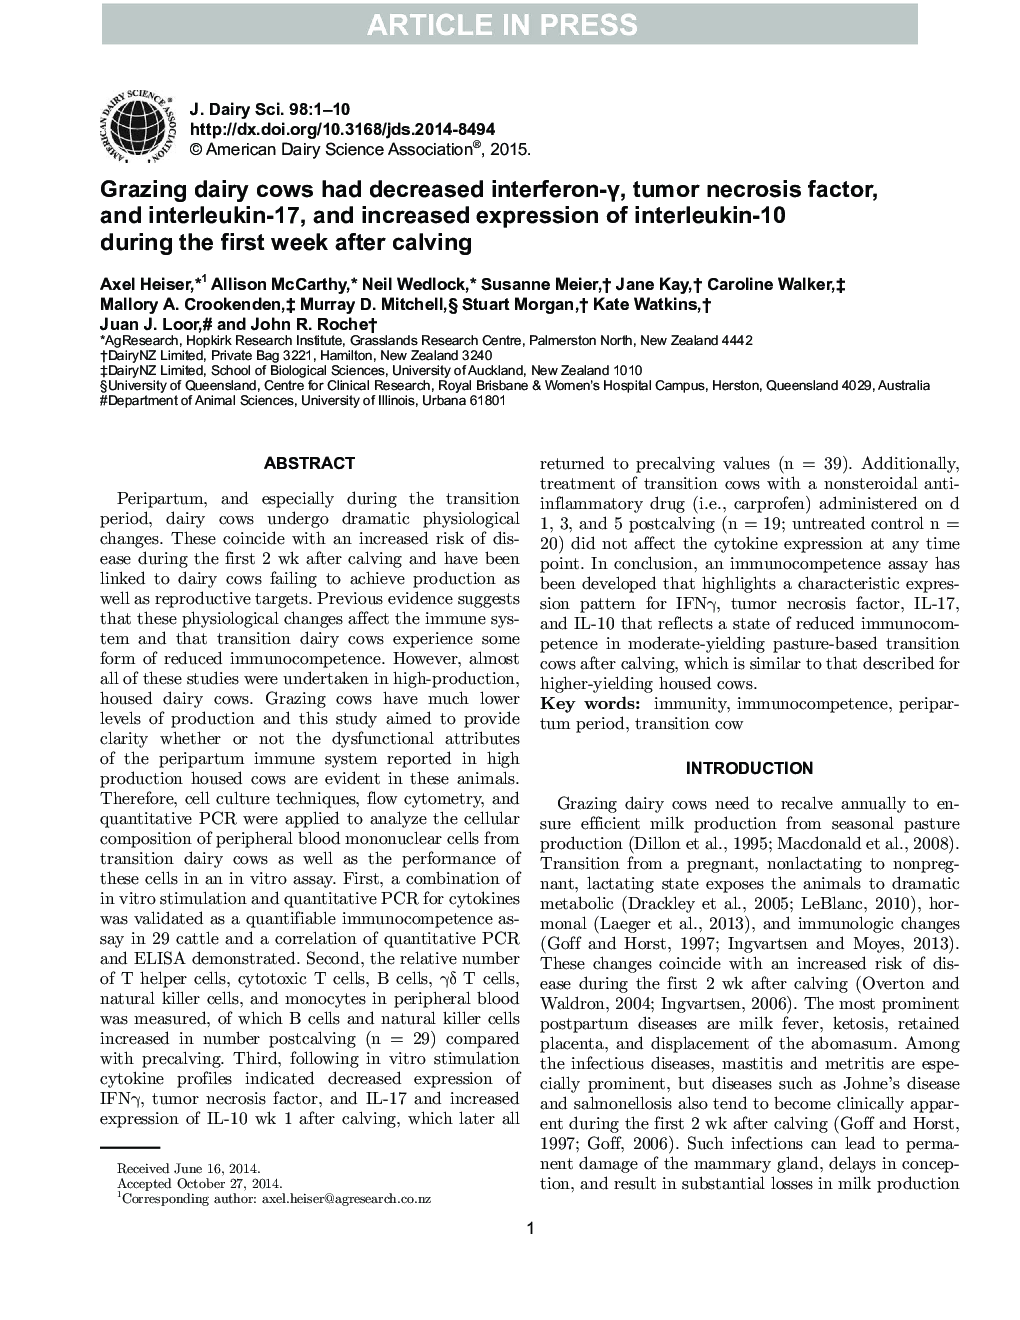 Grazing dairy cows had decreased interferon-Î³, tumor necrosis factor, and interleukin-17, and increased expression of interleukin-10 during the first week after calving